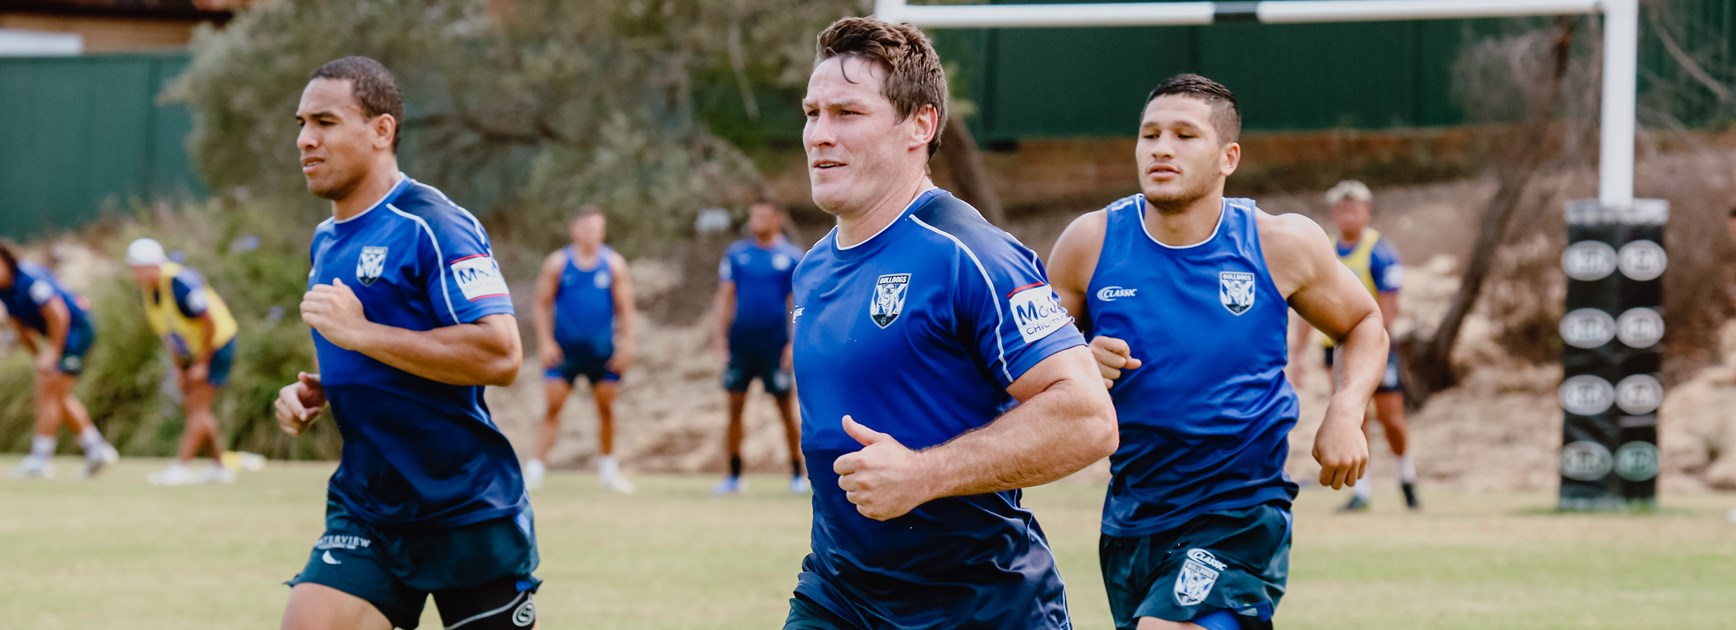 New NRL world: Players pay deal kicks off training in COVID-19 times